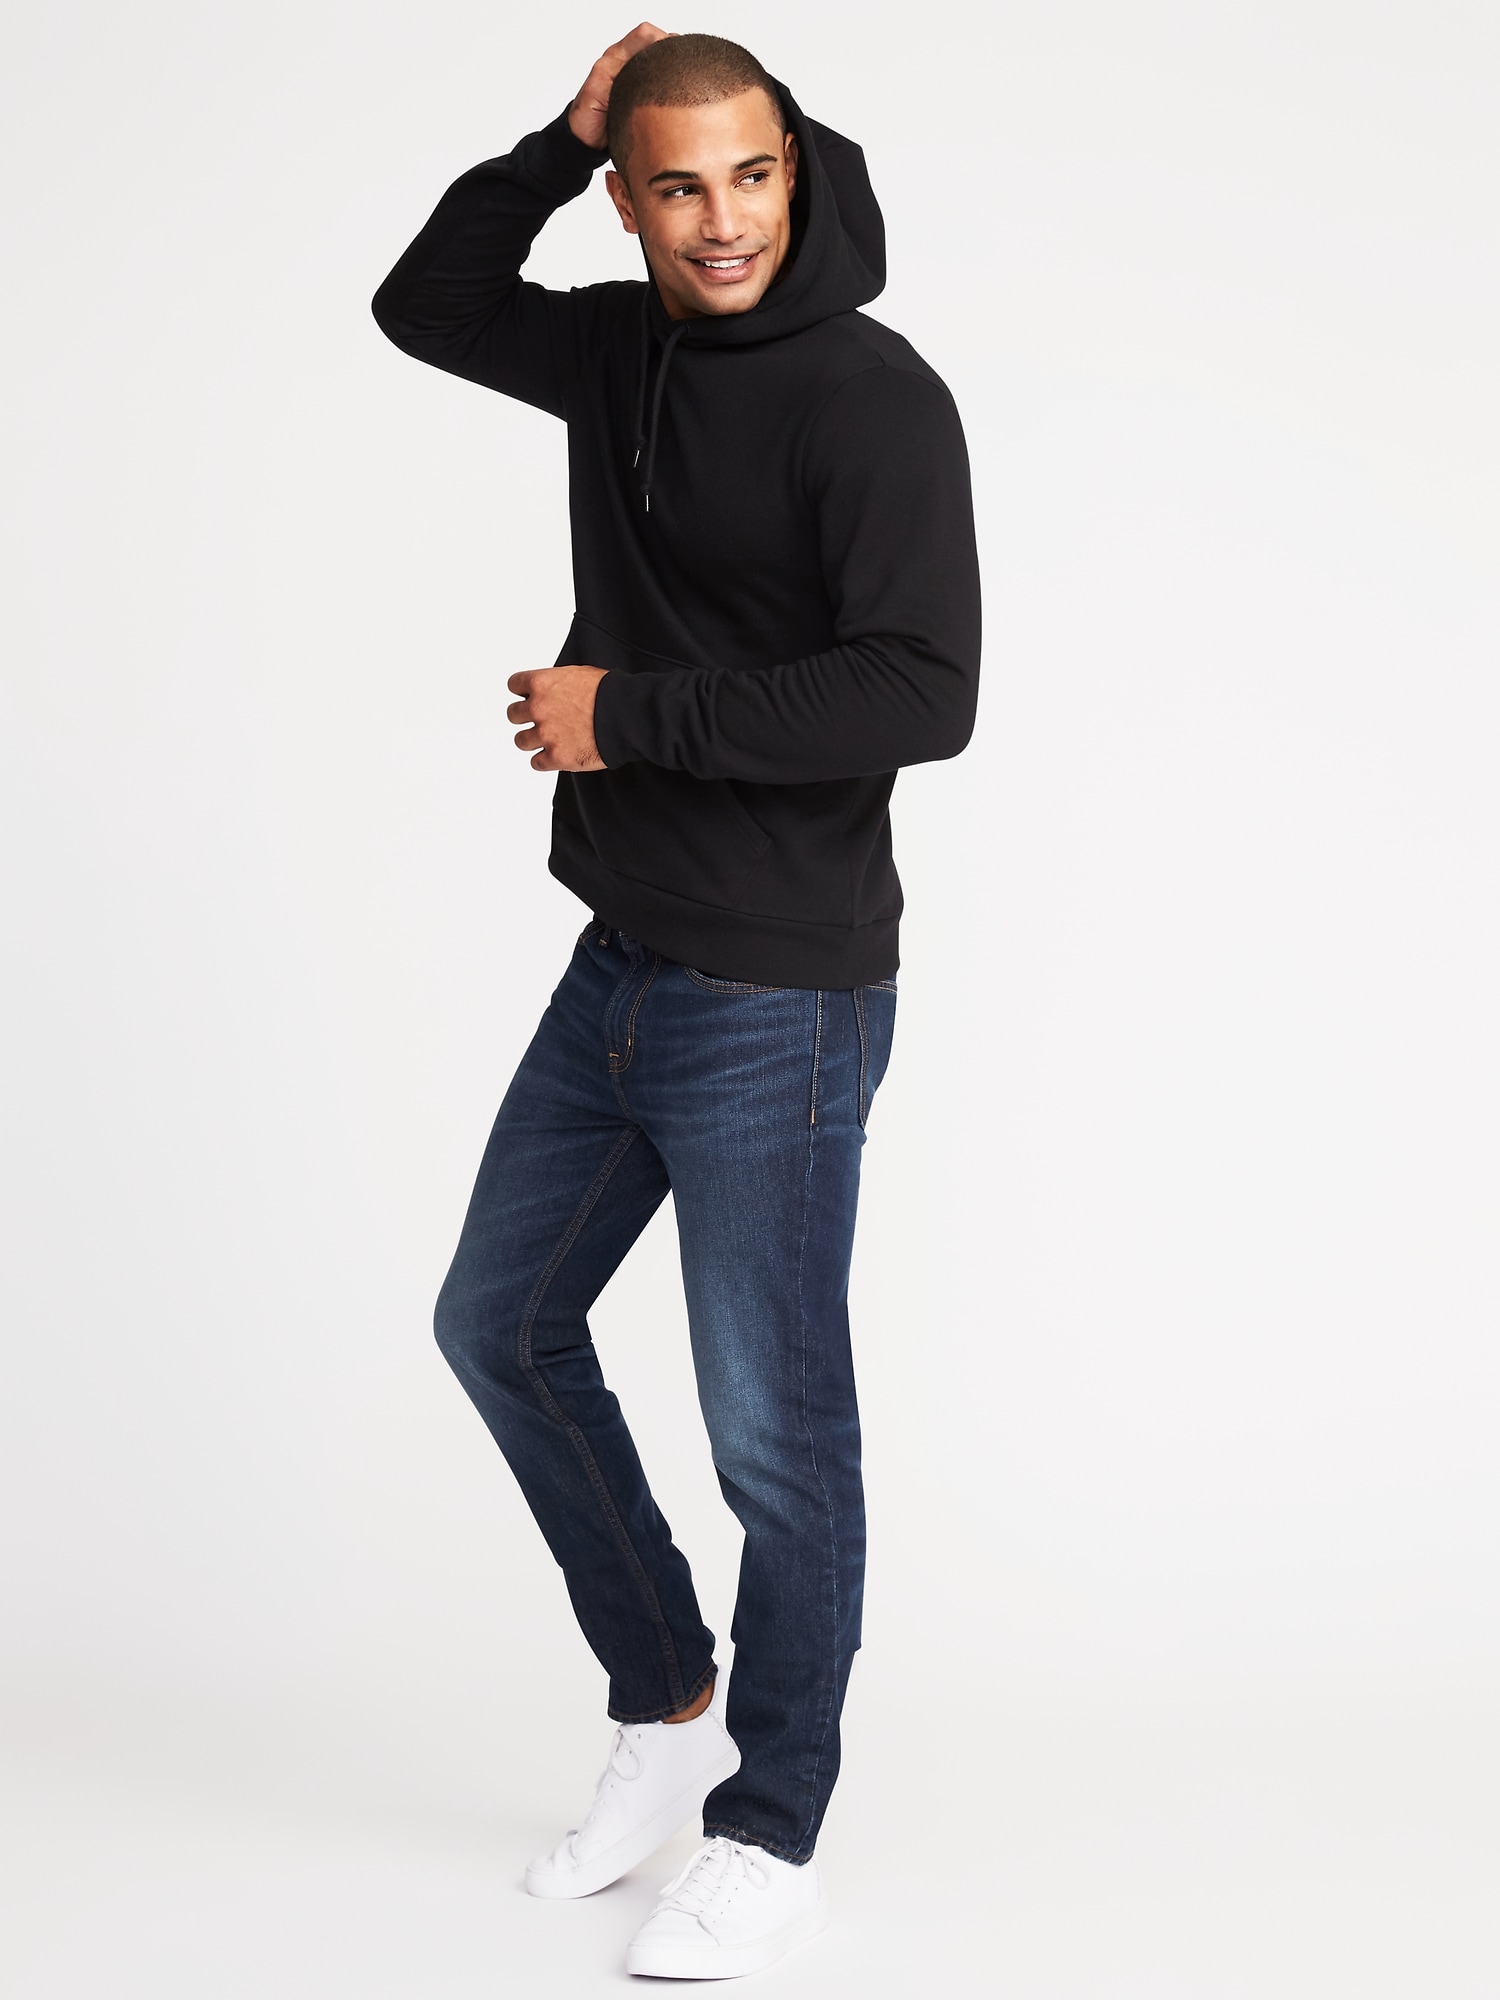 Classic Pullover Hoodie for Men | Old Navy